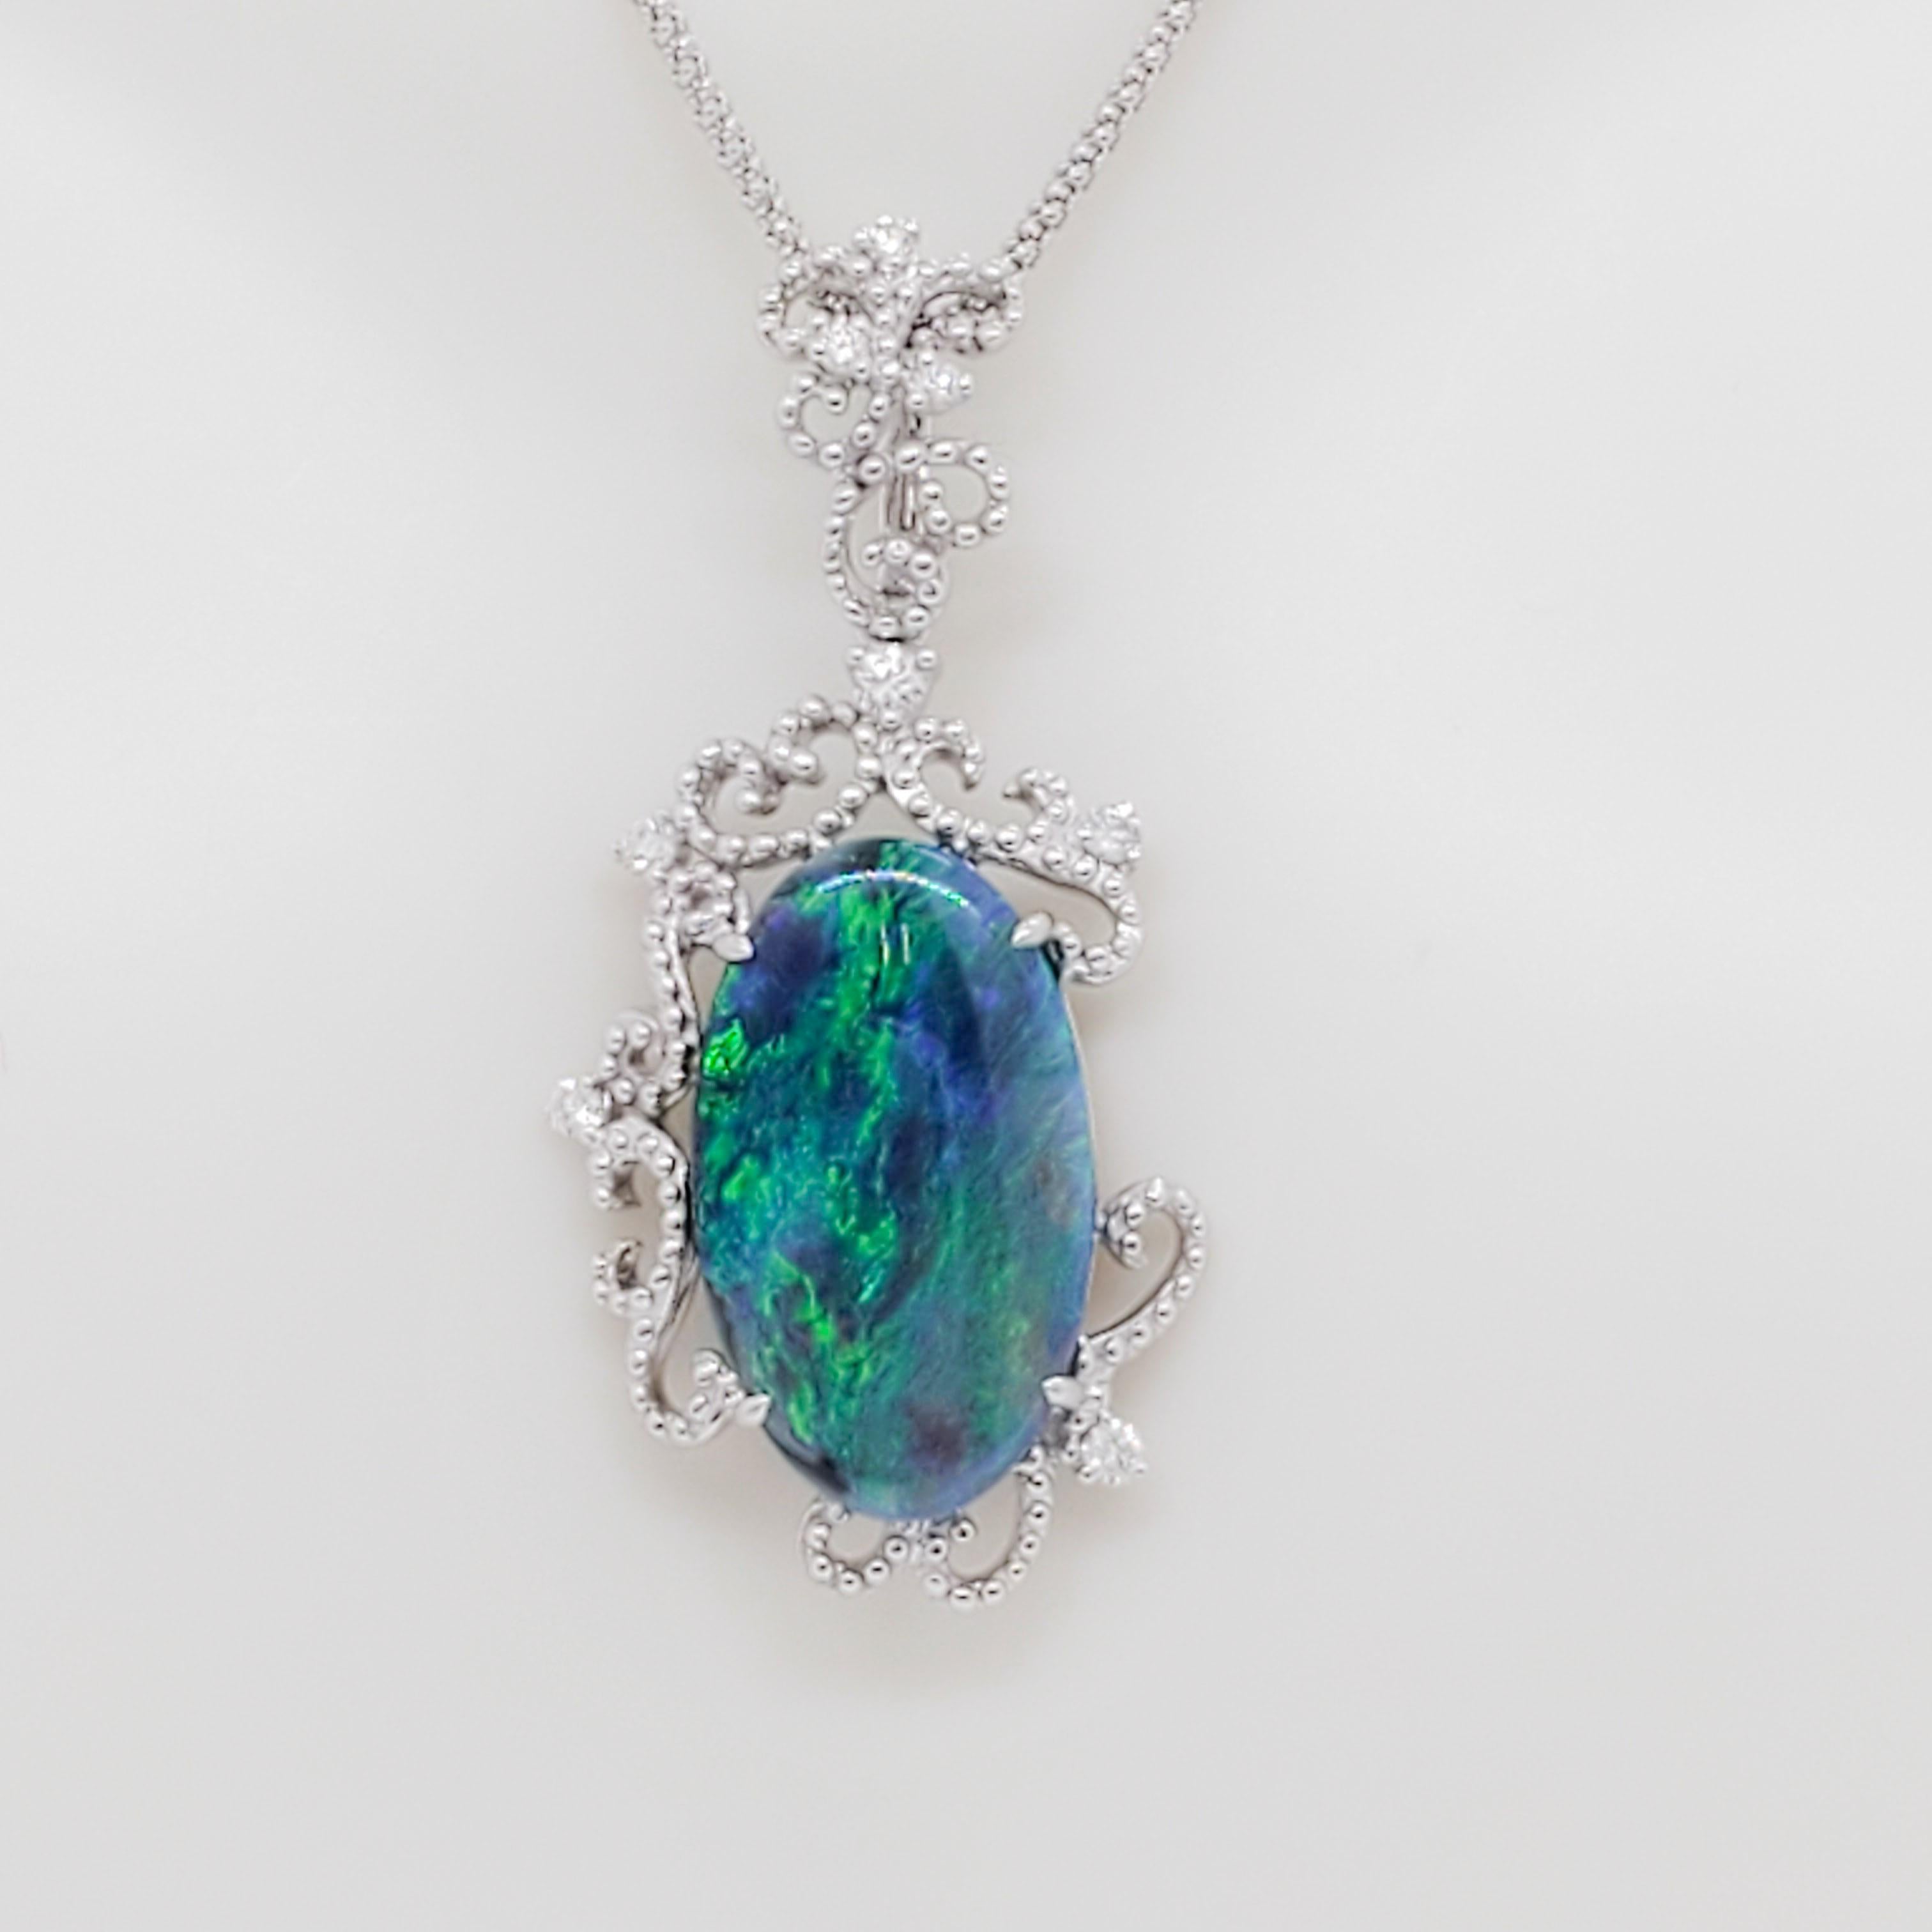 Gorgeous 5.96 ct. black opal oval with 0.22 ct. white diamond rounds.  Handmade in 18k white gold.  Chain is 18